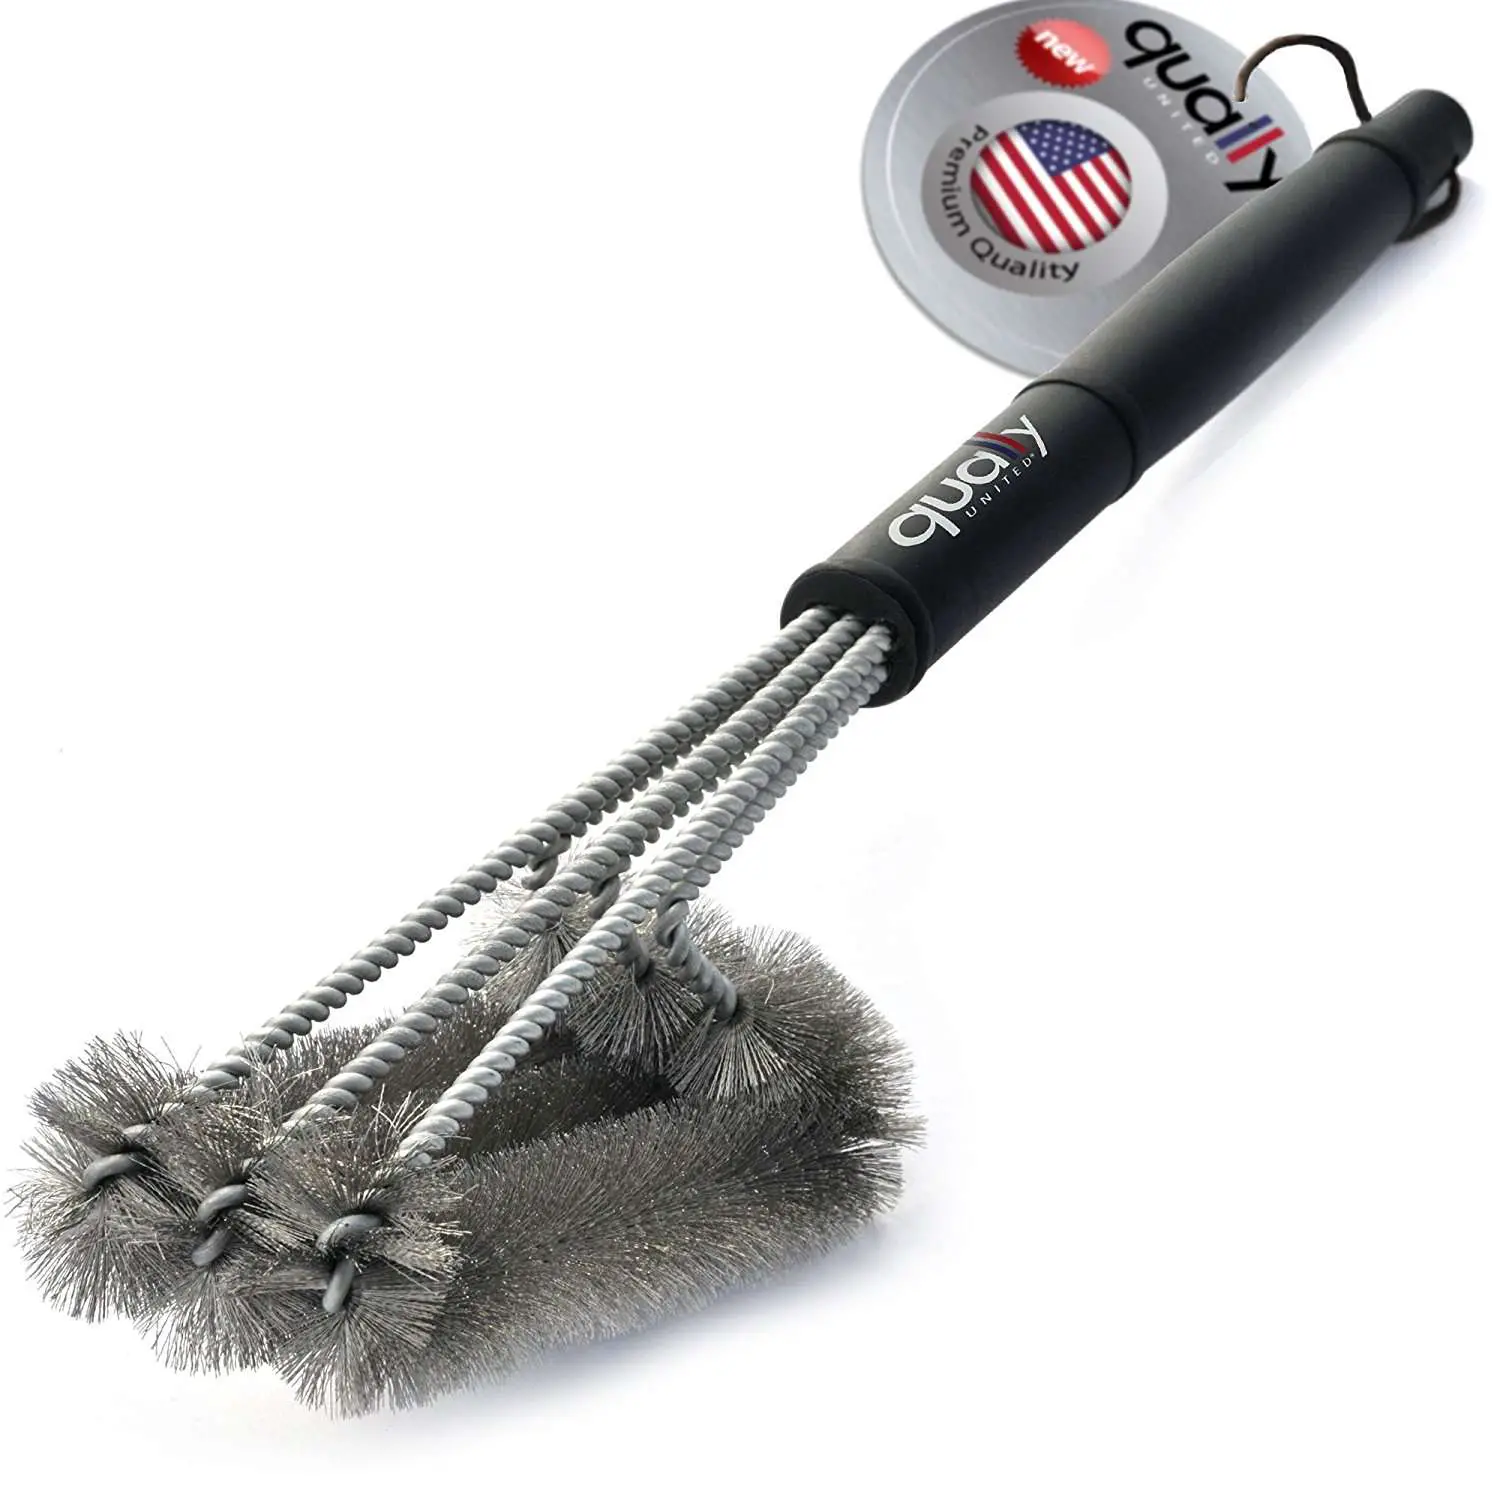 Top 10 Best Bbq Grill Cleaner Brushes in 2021 Reviews